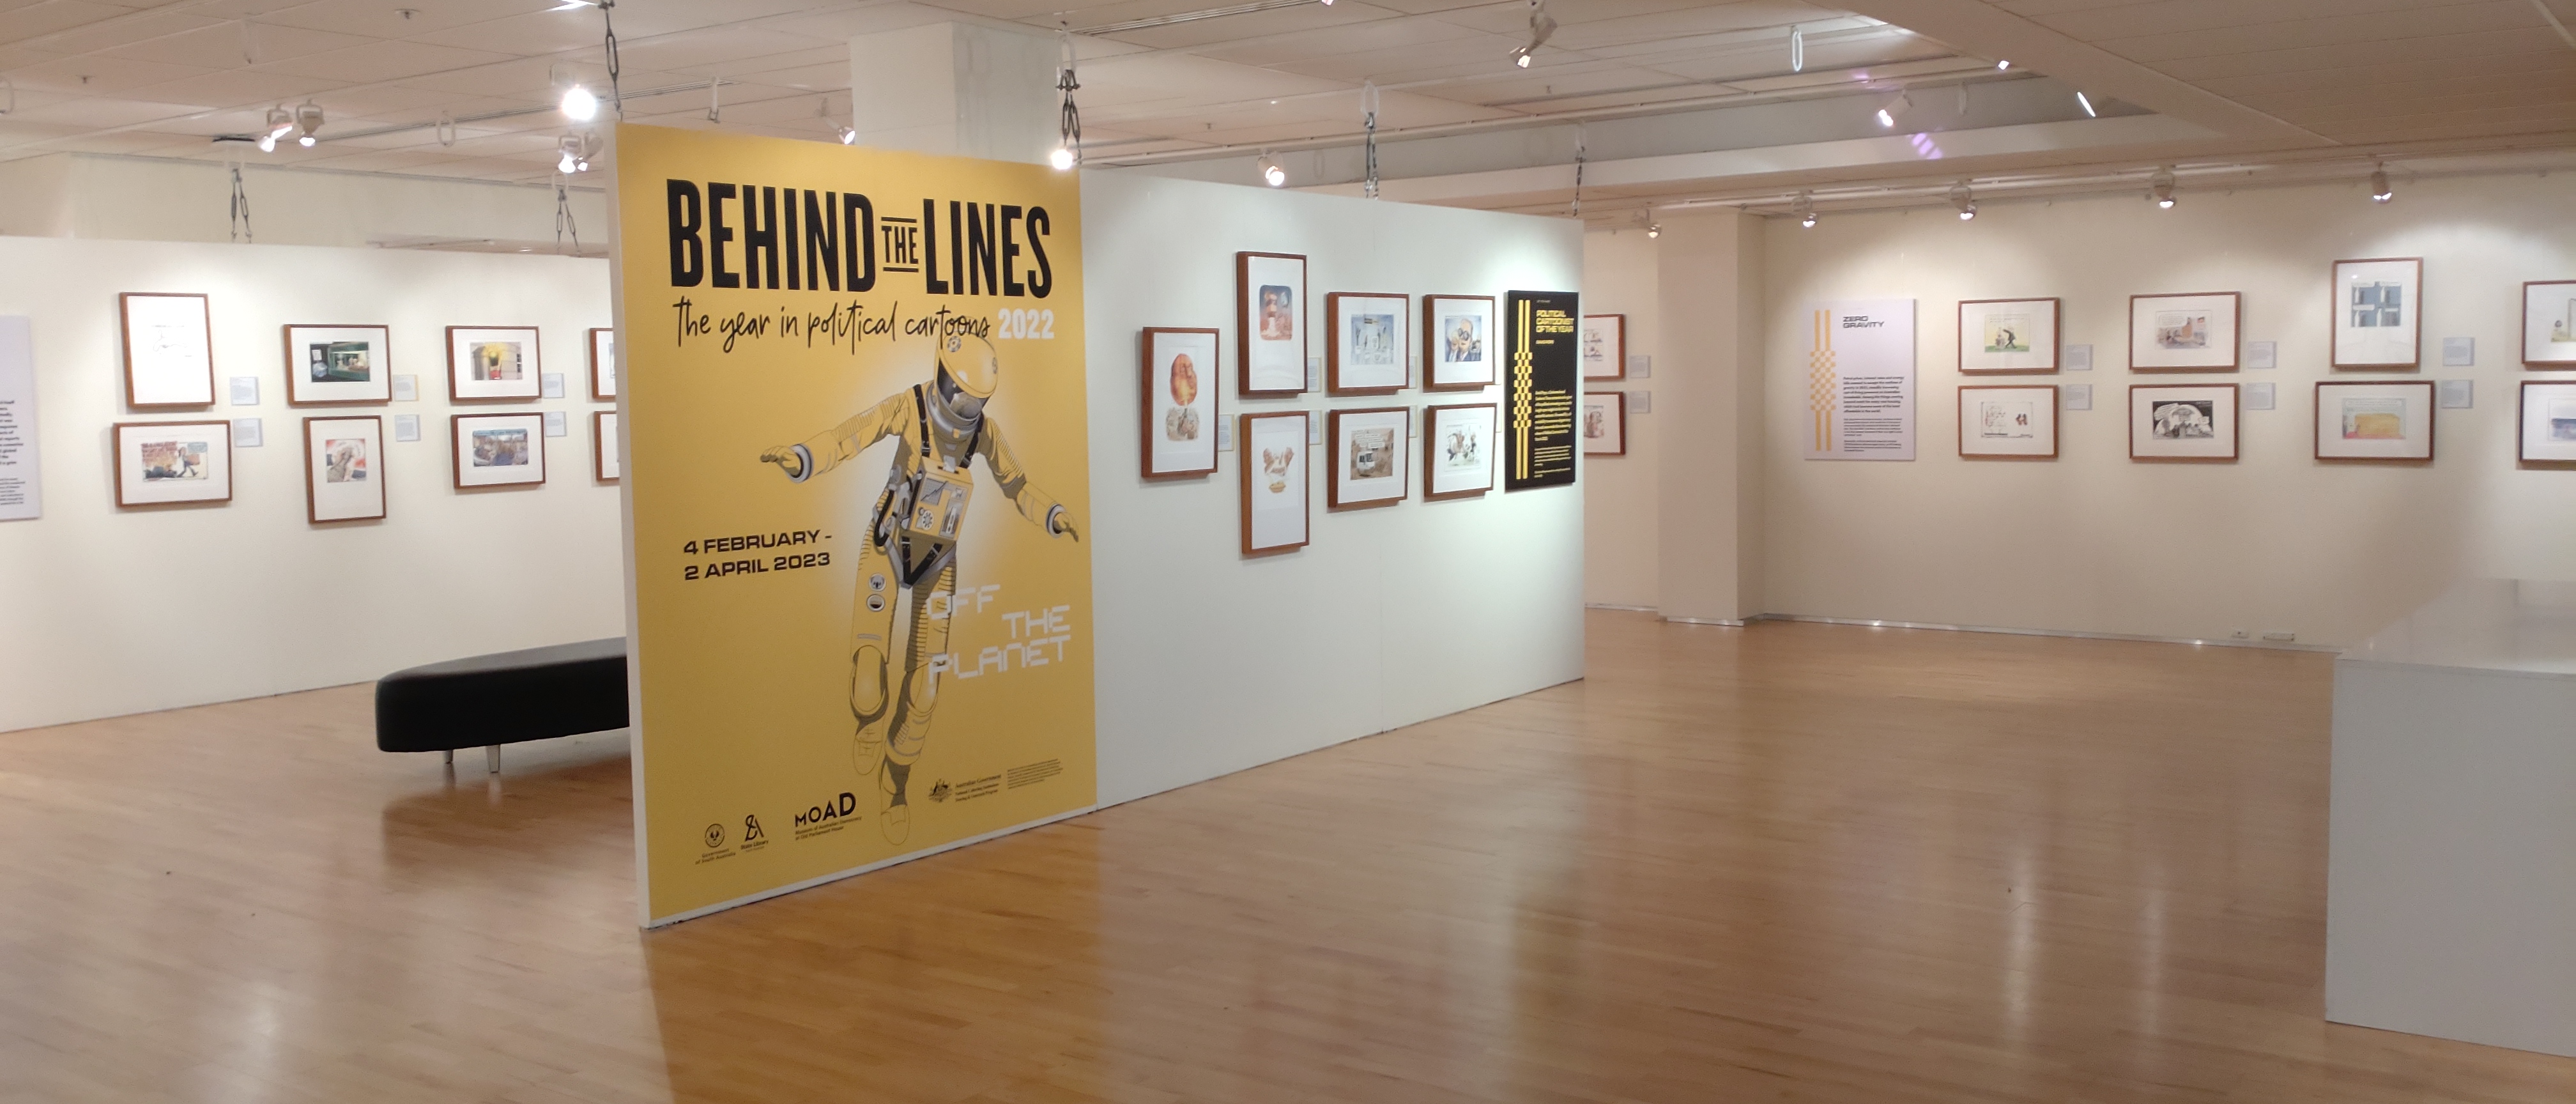 Behind The Lines exhibition installed at the State Library of SA